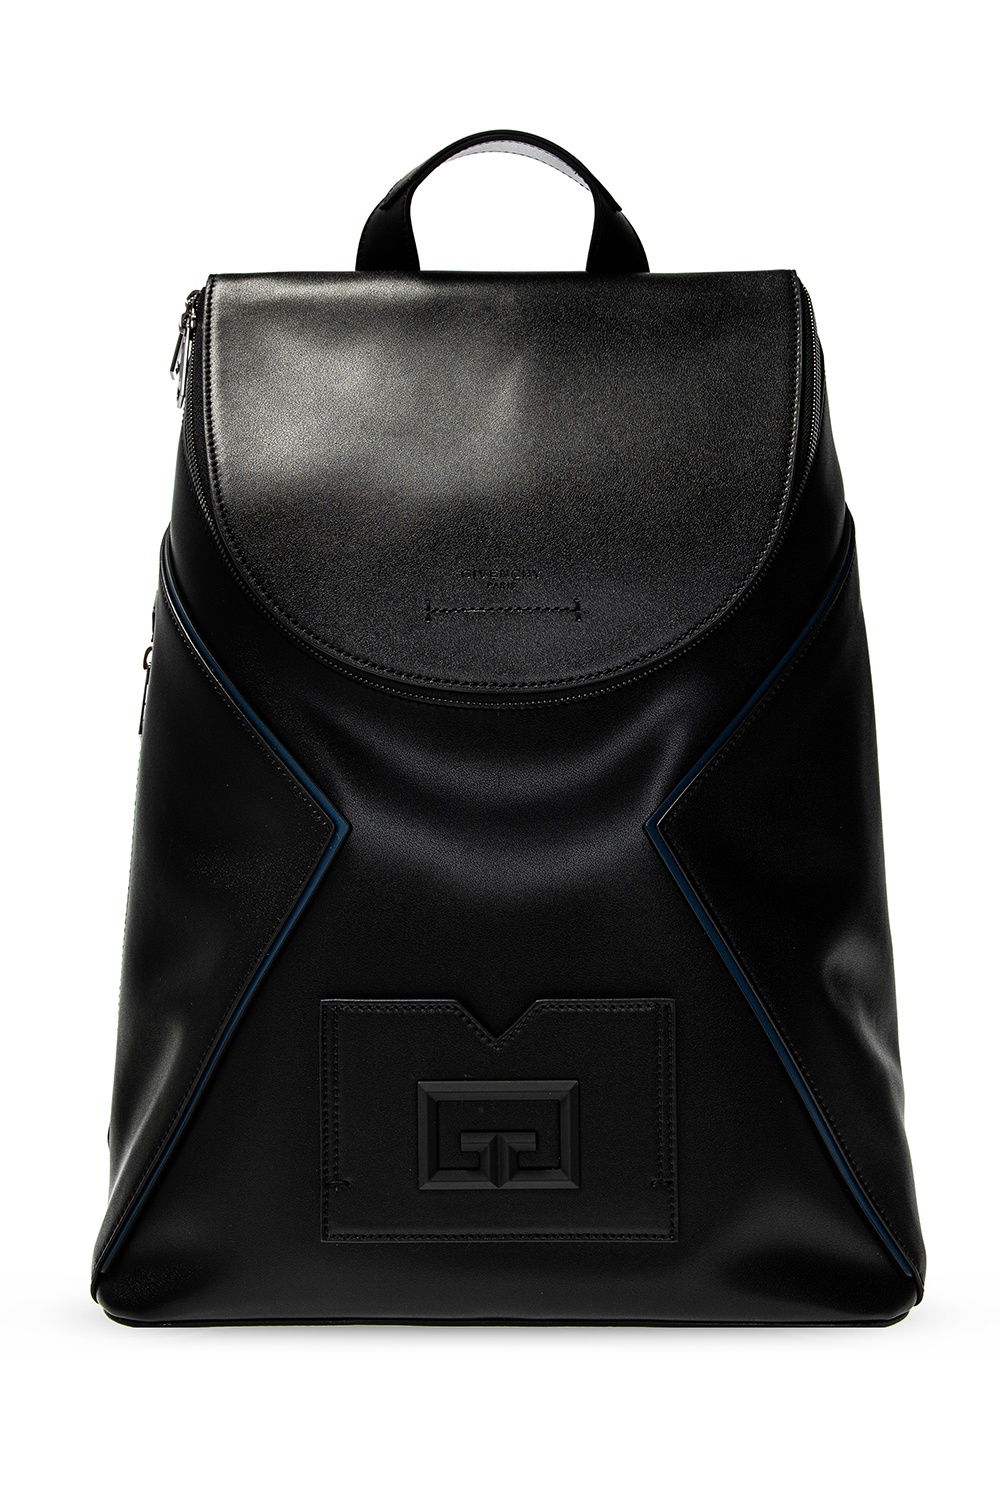 leather backpack singapore